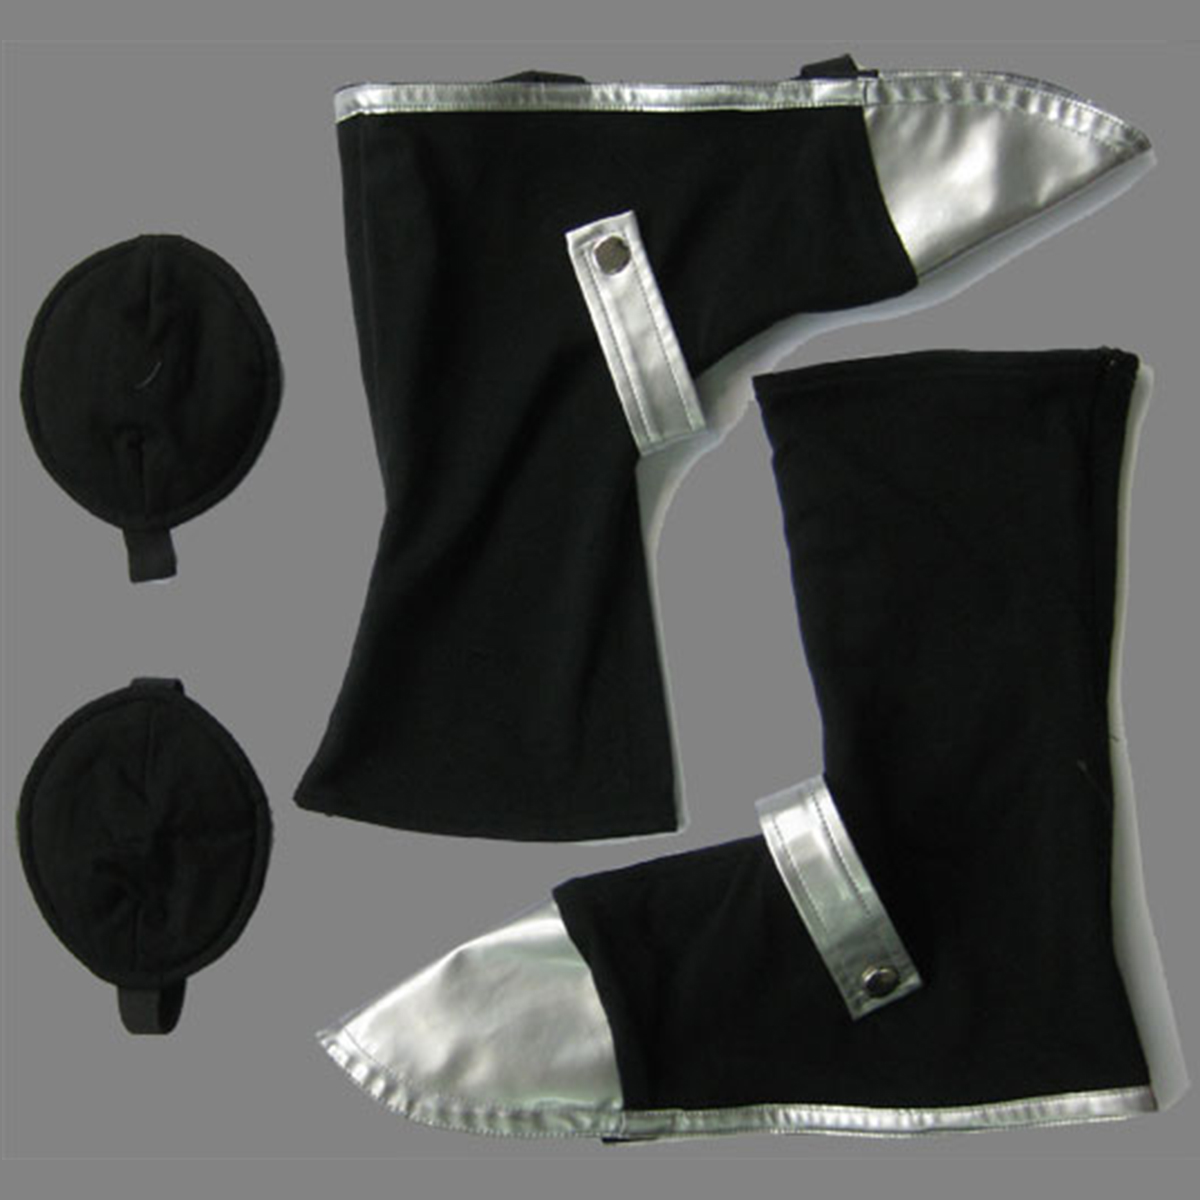 The Holy Grail War Archer Cosplay Costumes New Zealand Online Store